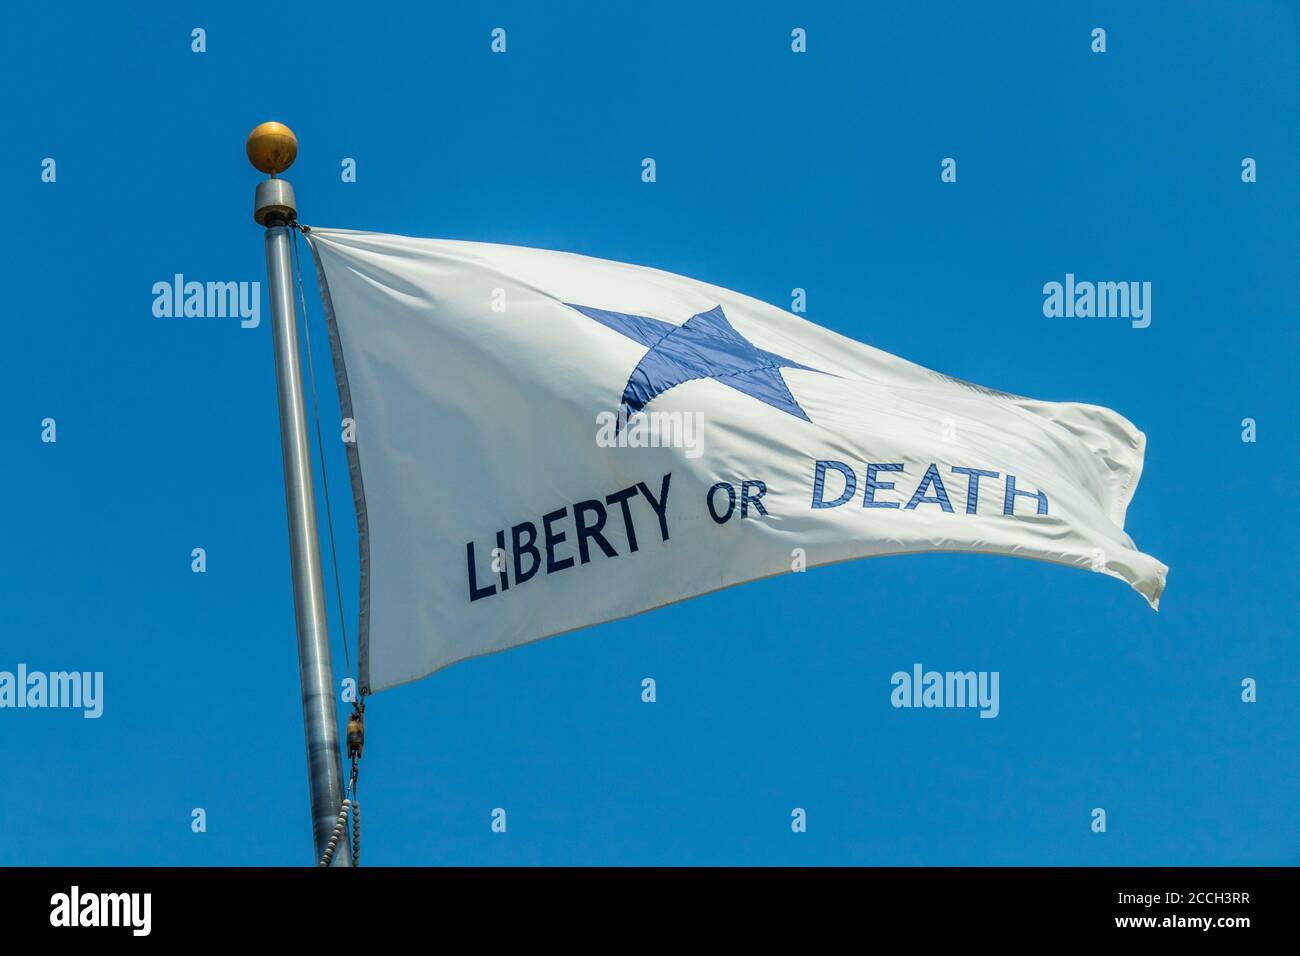 Lone Star Monument und Historical Flags Park (Texas Revolution Flags) in Conroe, Texas. Stockfoto